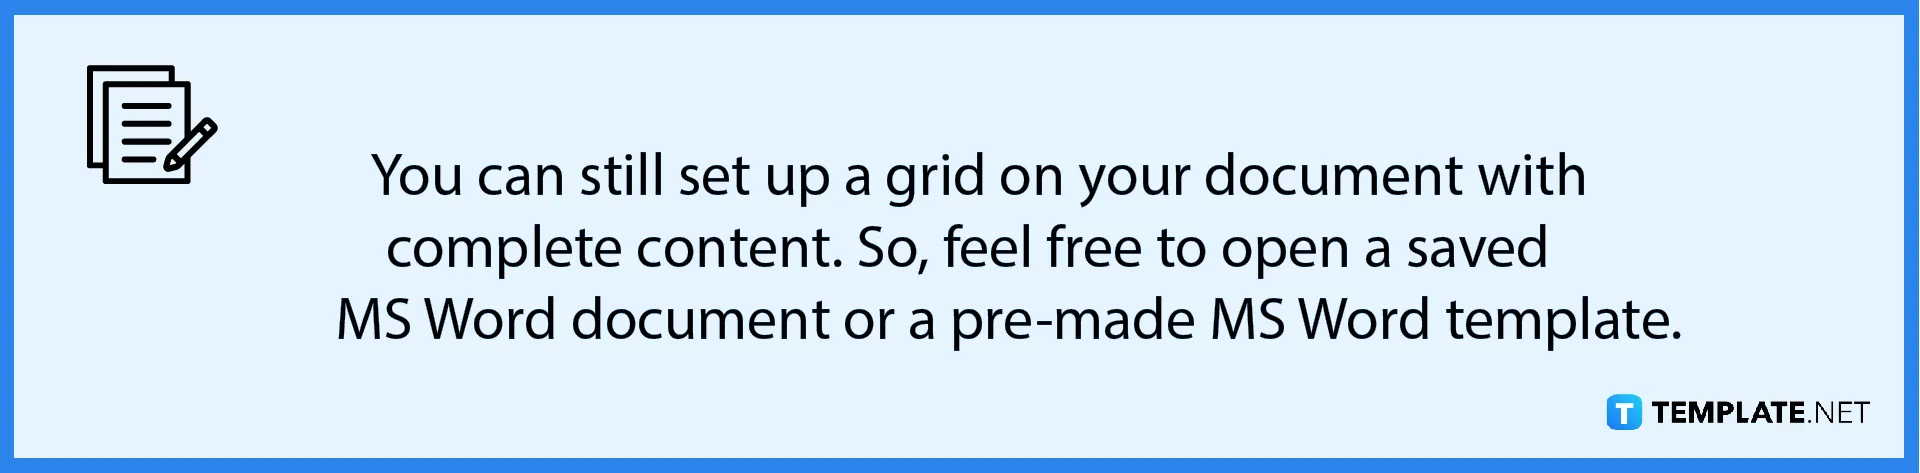 how-to-set-up-a-grid-in-microsoft-word-note-1